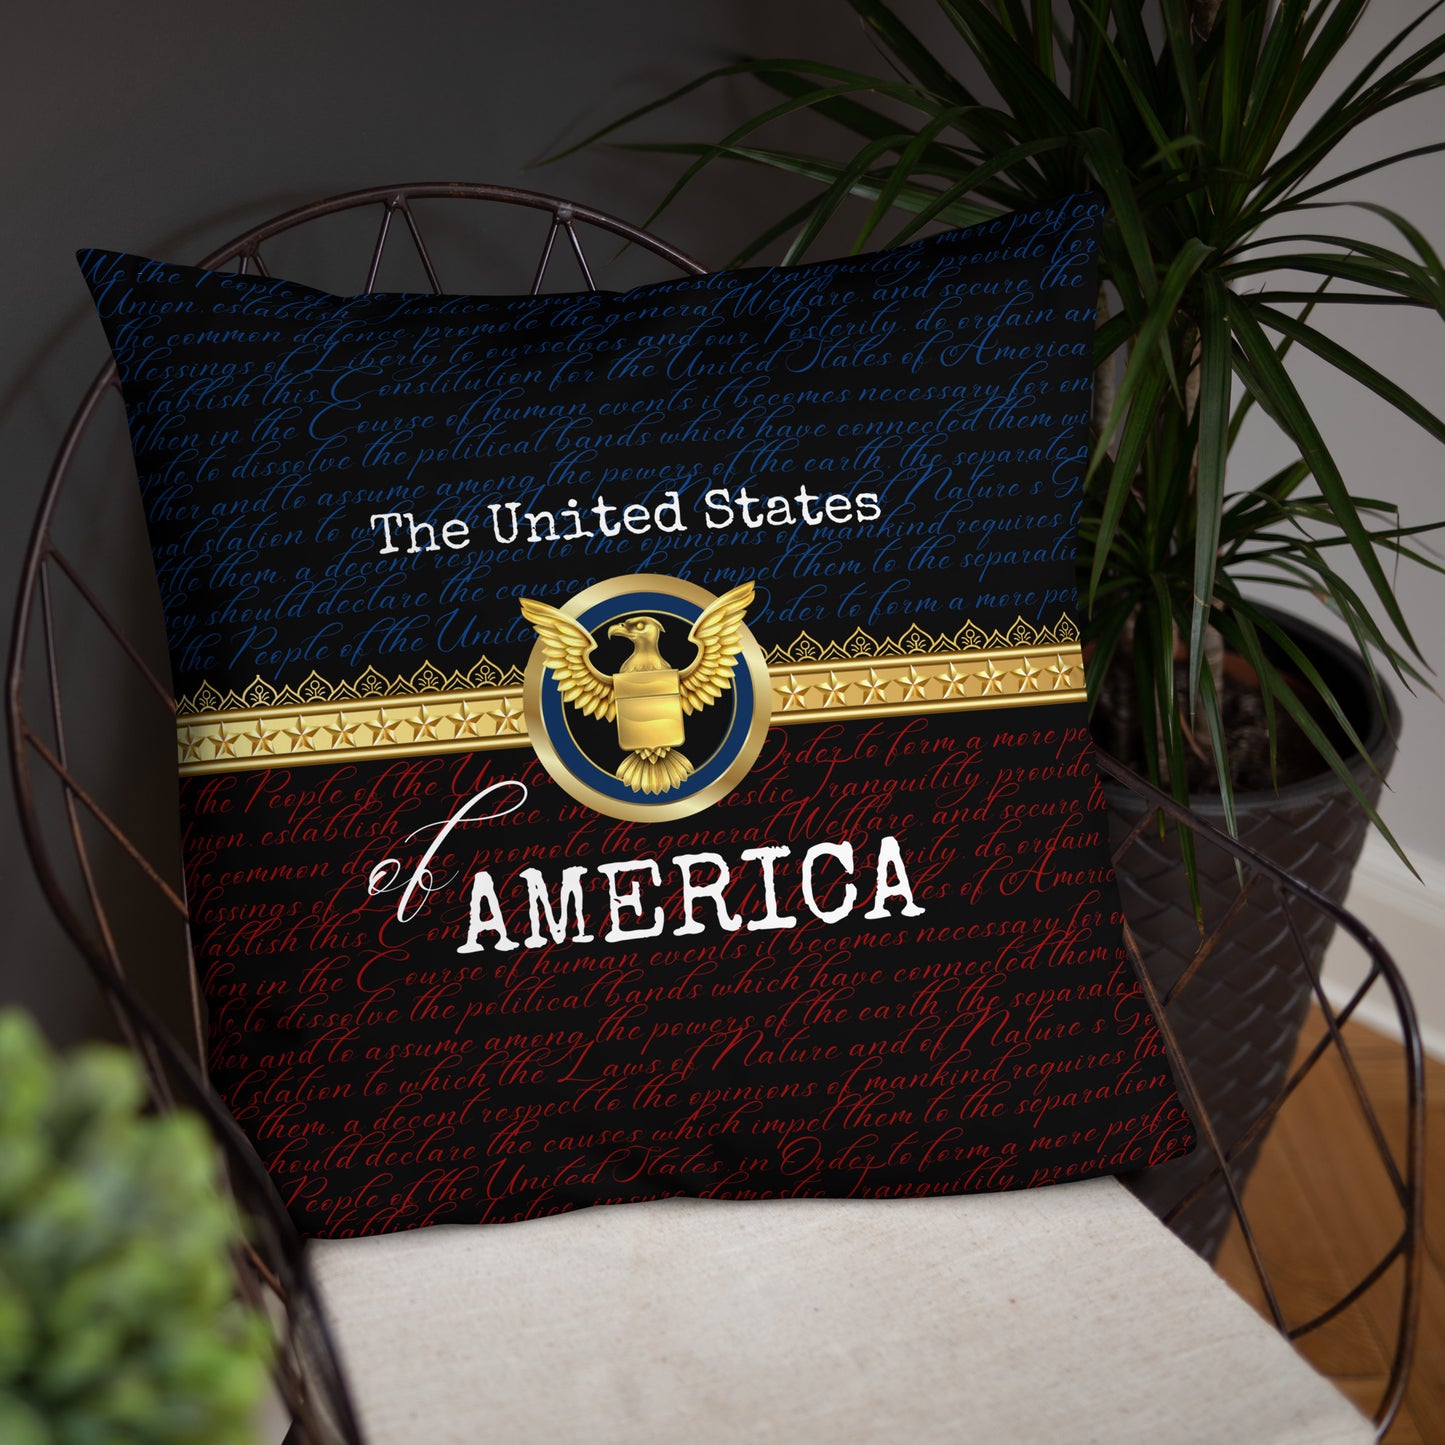 United States Gift #1 | United States of America Gift | Travel Vacation Gift | Travel Souvenir Gift | Vacation Memento Gift | Souvenir Gift Pillow | Keepsake souvenir gift | Travel Keepsake Gift | United States Travel Gift